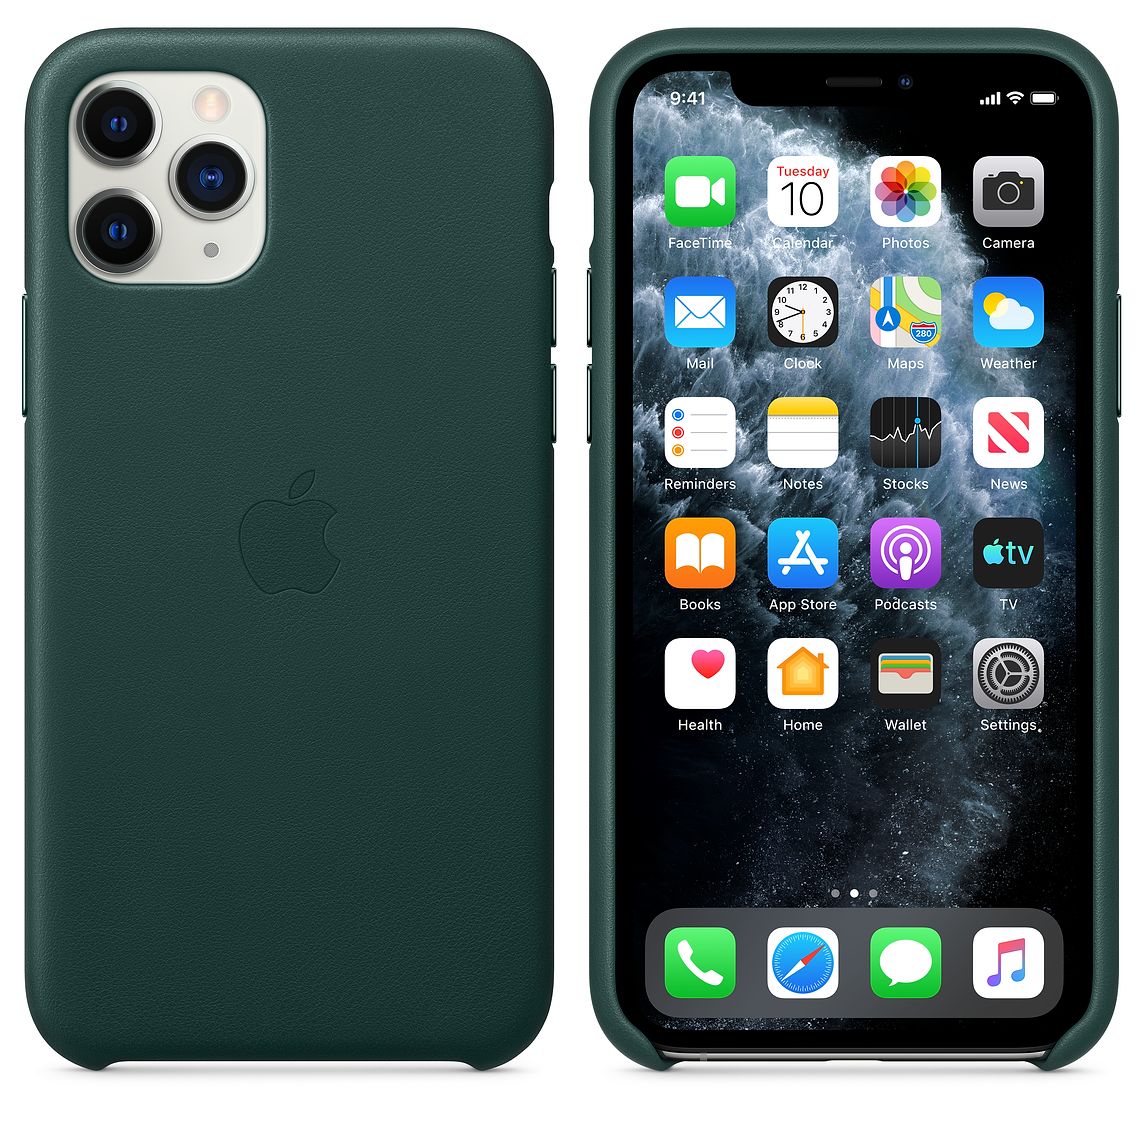 The Best Apple iPhone 11 Pro And iPhone 11 Pro Max Cases Right Now